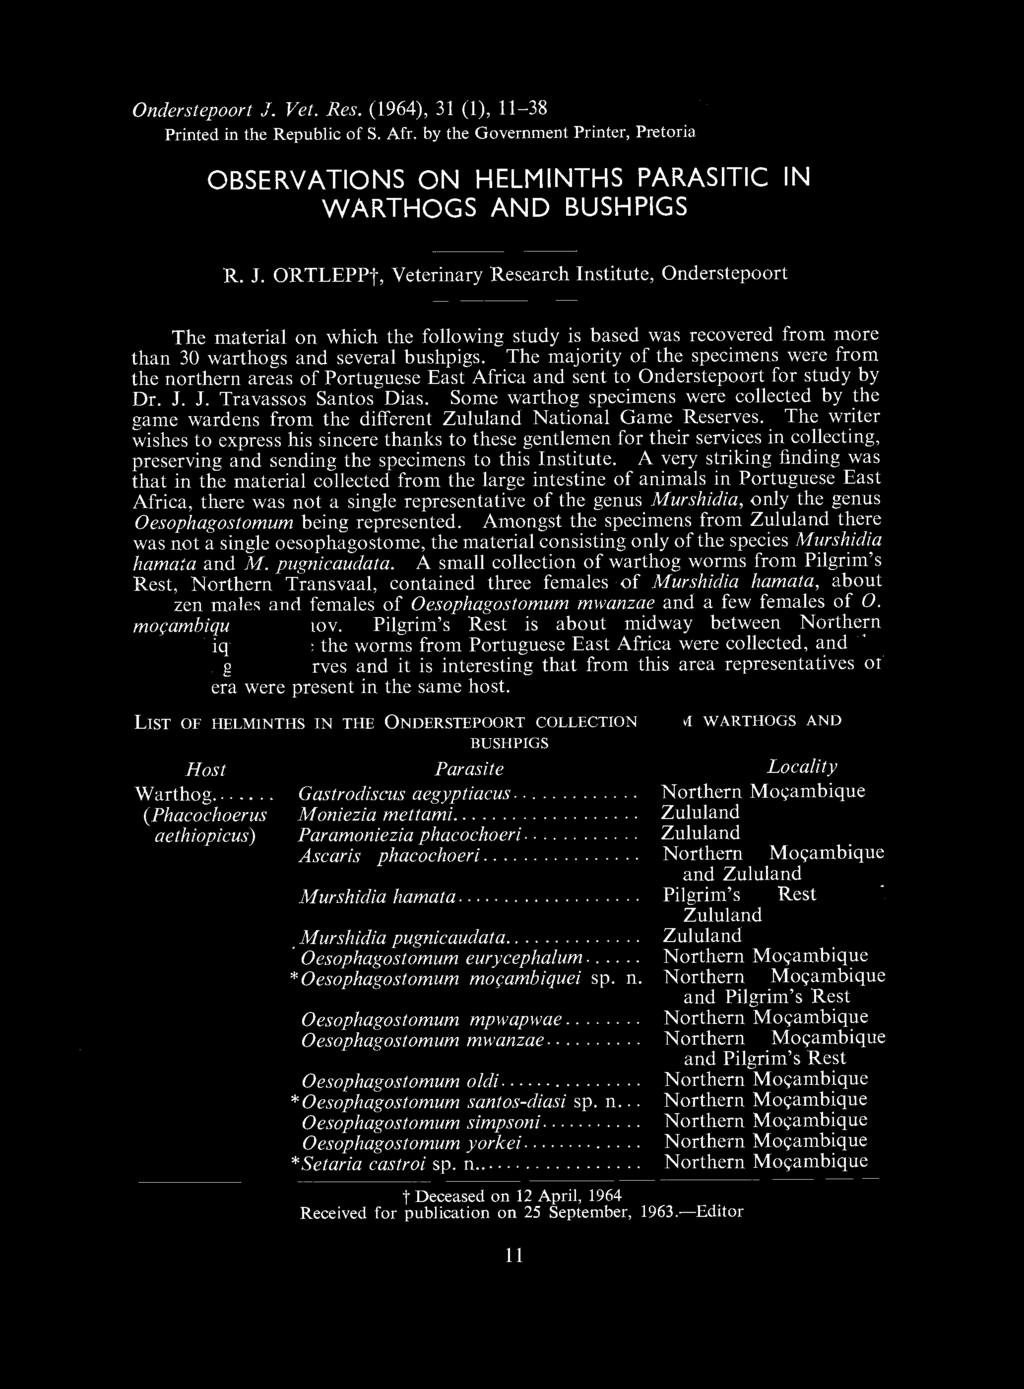 Onderstepoort J. Vet. Res. (1964), 31 (1), 11-38 Printed in the Republic of S. Afr. by the Government Printer, Pretoria OBSERVATIONS ON HELMINTHS PARASITIC IN WARTHOGS AND BUSHPIGS R. J. ORTLEPPt, Veterinary Research Institute, Onderstepoort The material on which the following study is based was recovered from more than 30 warthogs and several bushpigs.